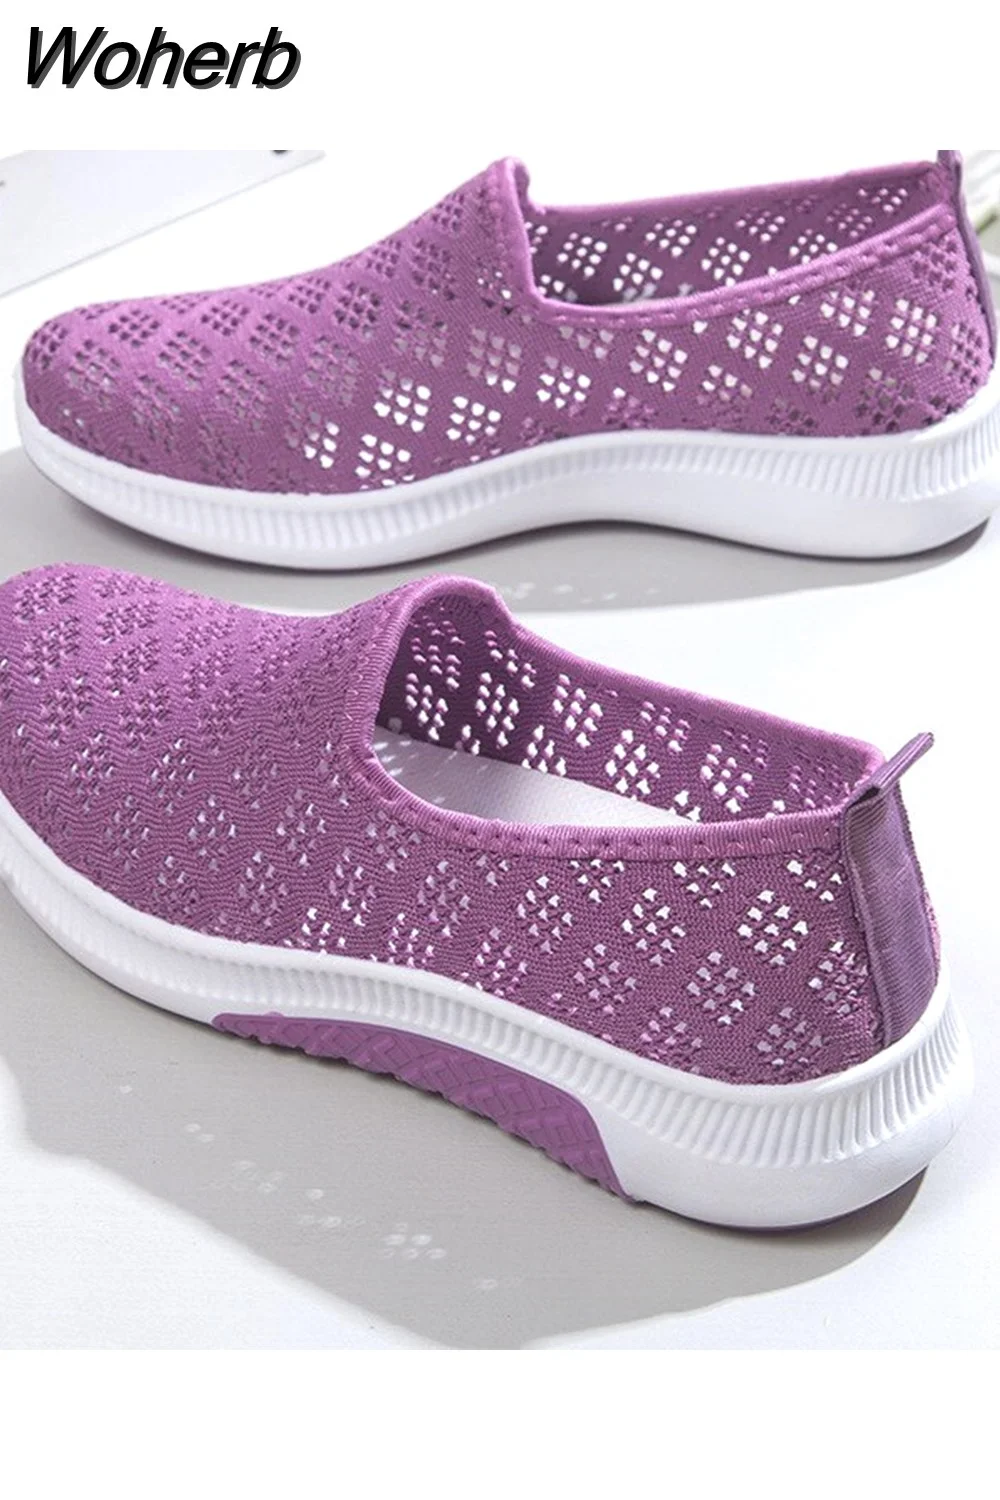 Woherb NEW Summer Korean Mesh Comfortable Women Shoes Breathable Hollow Sports Walking Sneakers Casual Flat Ladies 601-1